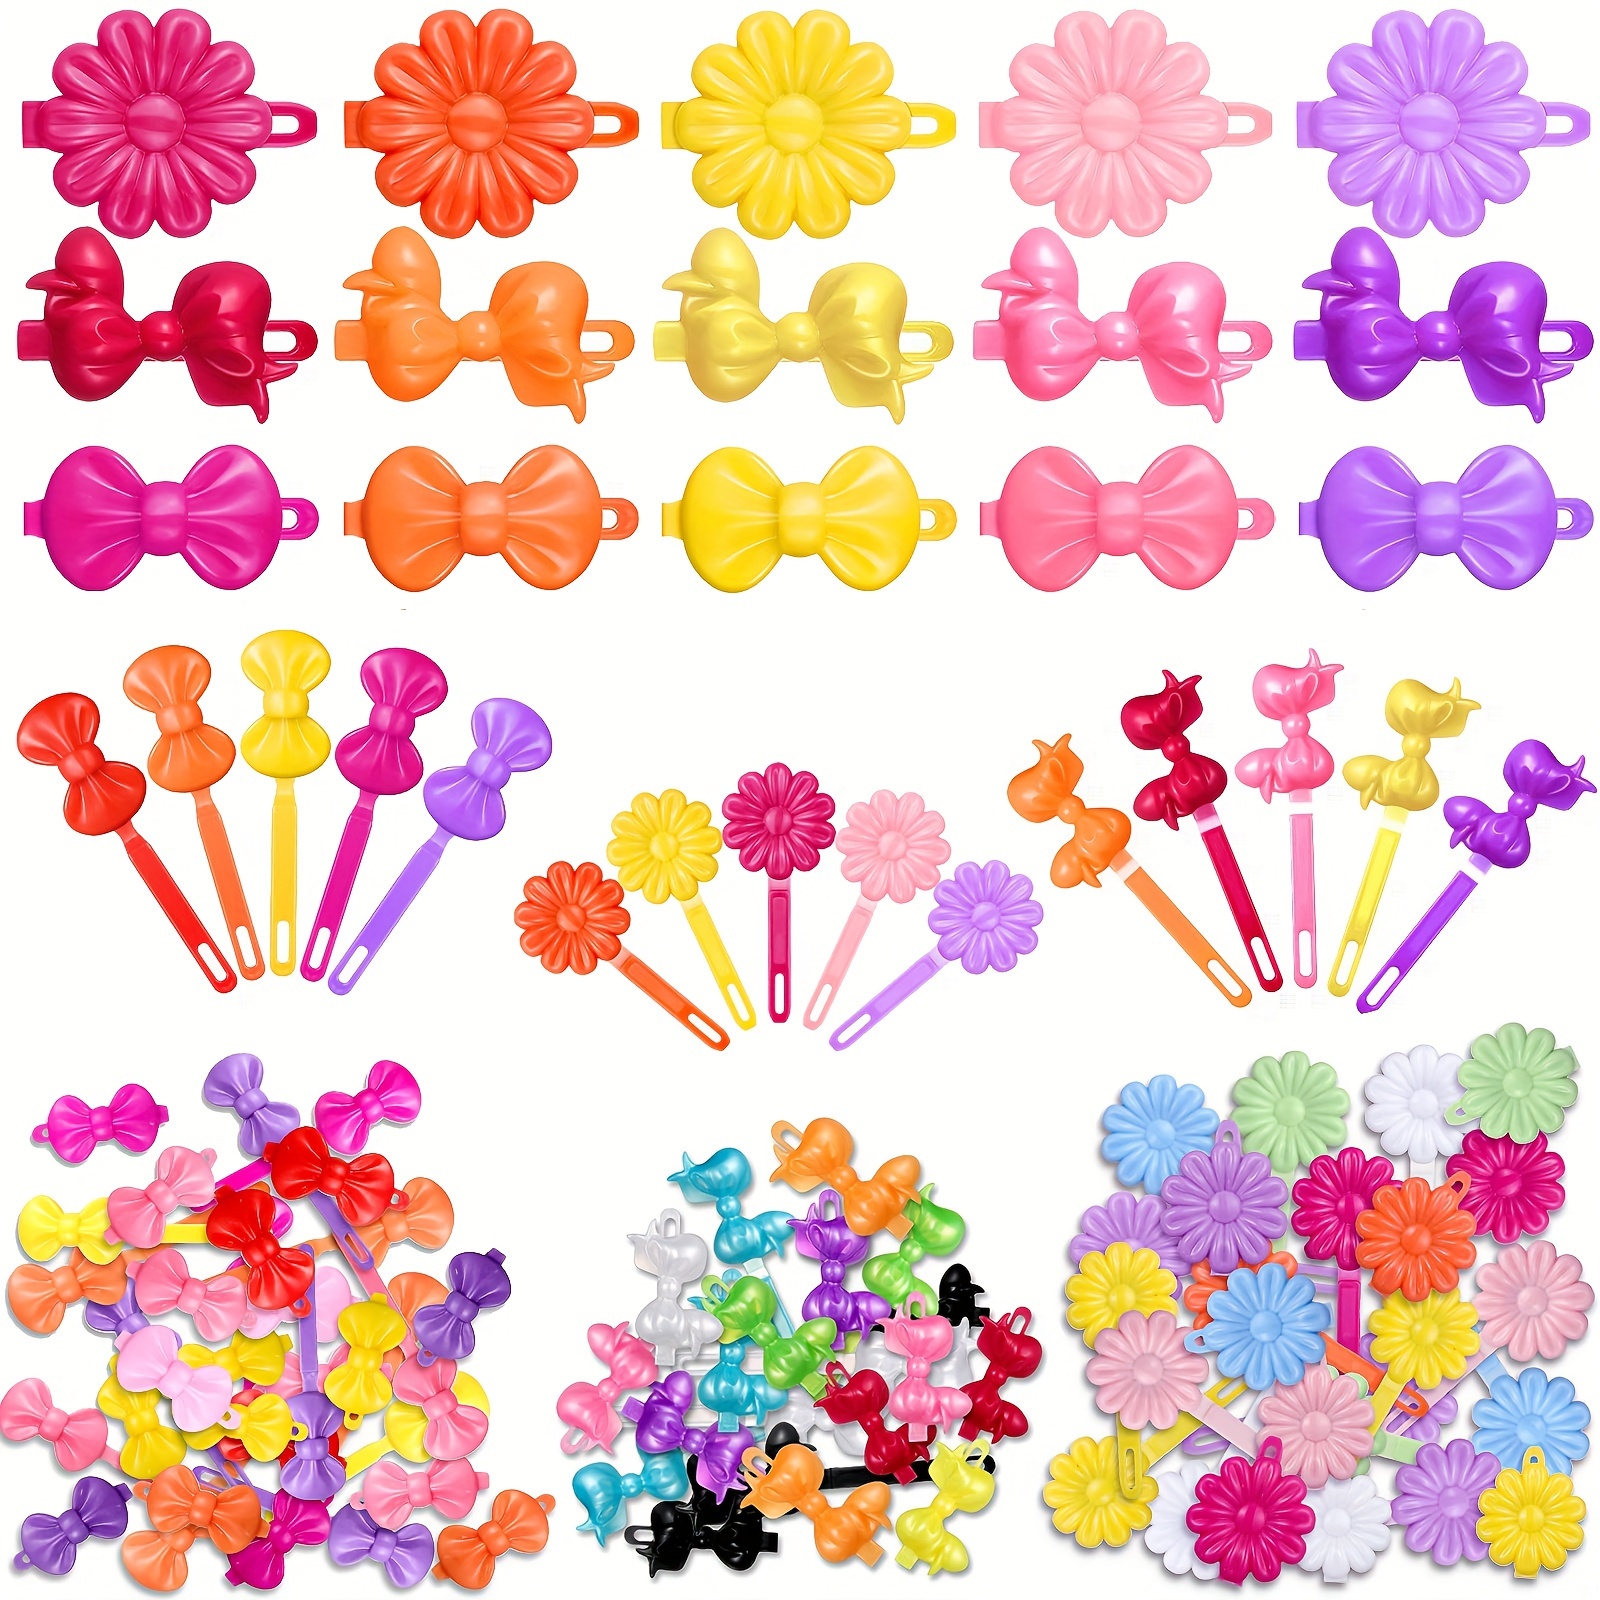 

54-piece Hair Clip Set For Girls - Plastic Self-hinge Barrettes, 80s/90s Cartoon-style Colorful Cute Hairpins, Mother's Day//christmas/birthday Gifts & Easter Egg Fillers (random Colors)